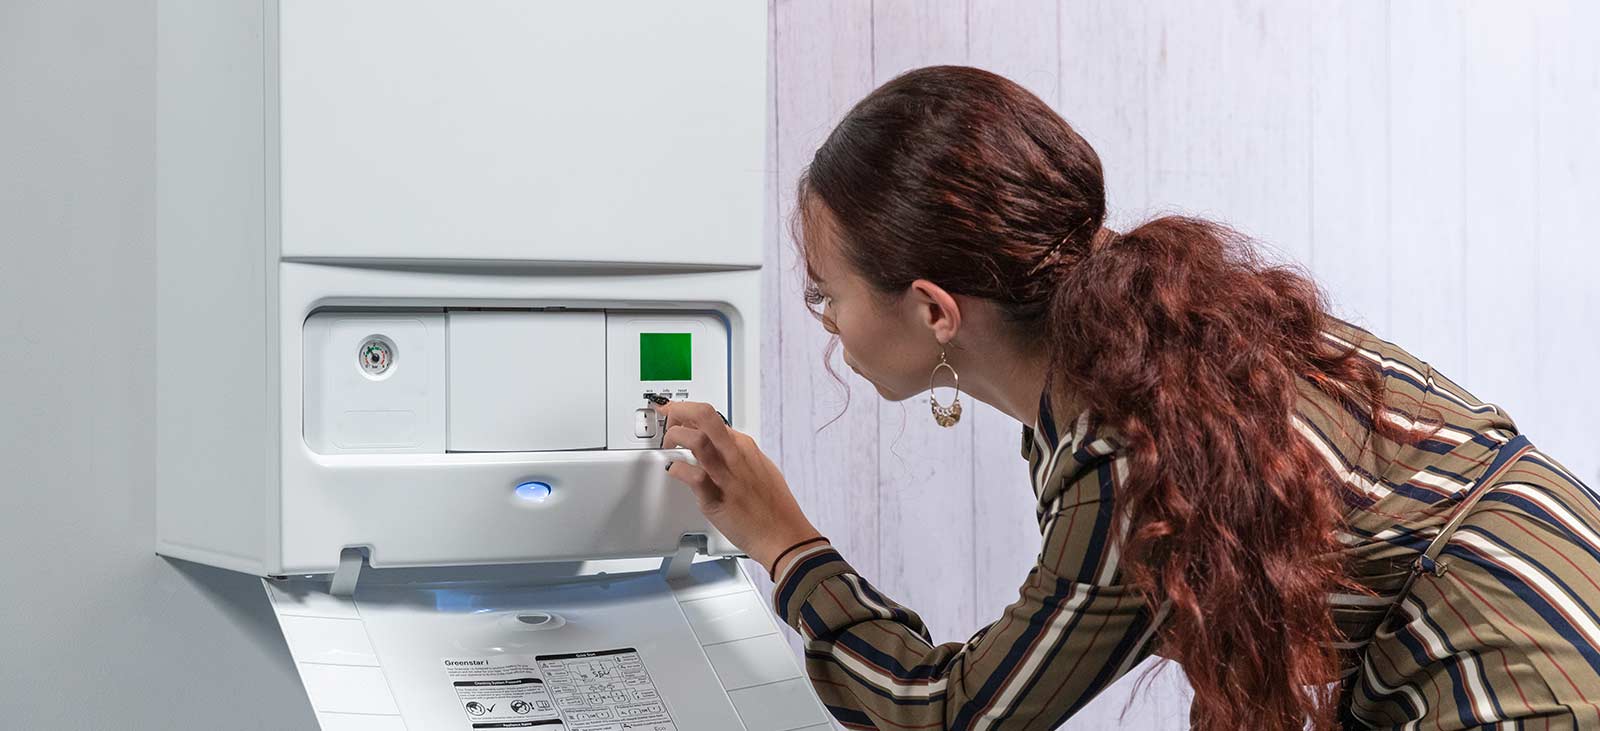 Image of a woman adjusting the settings on her boiler